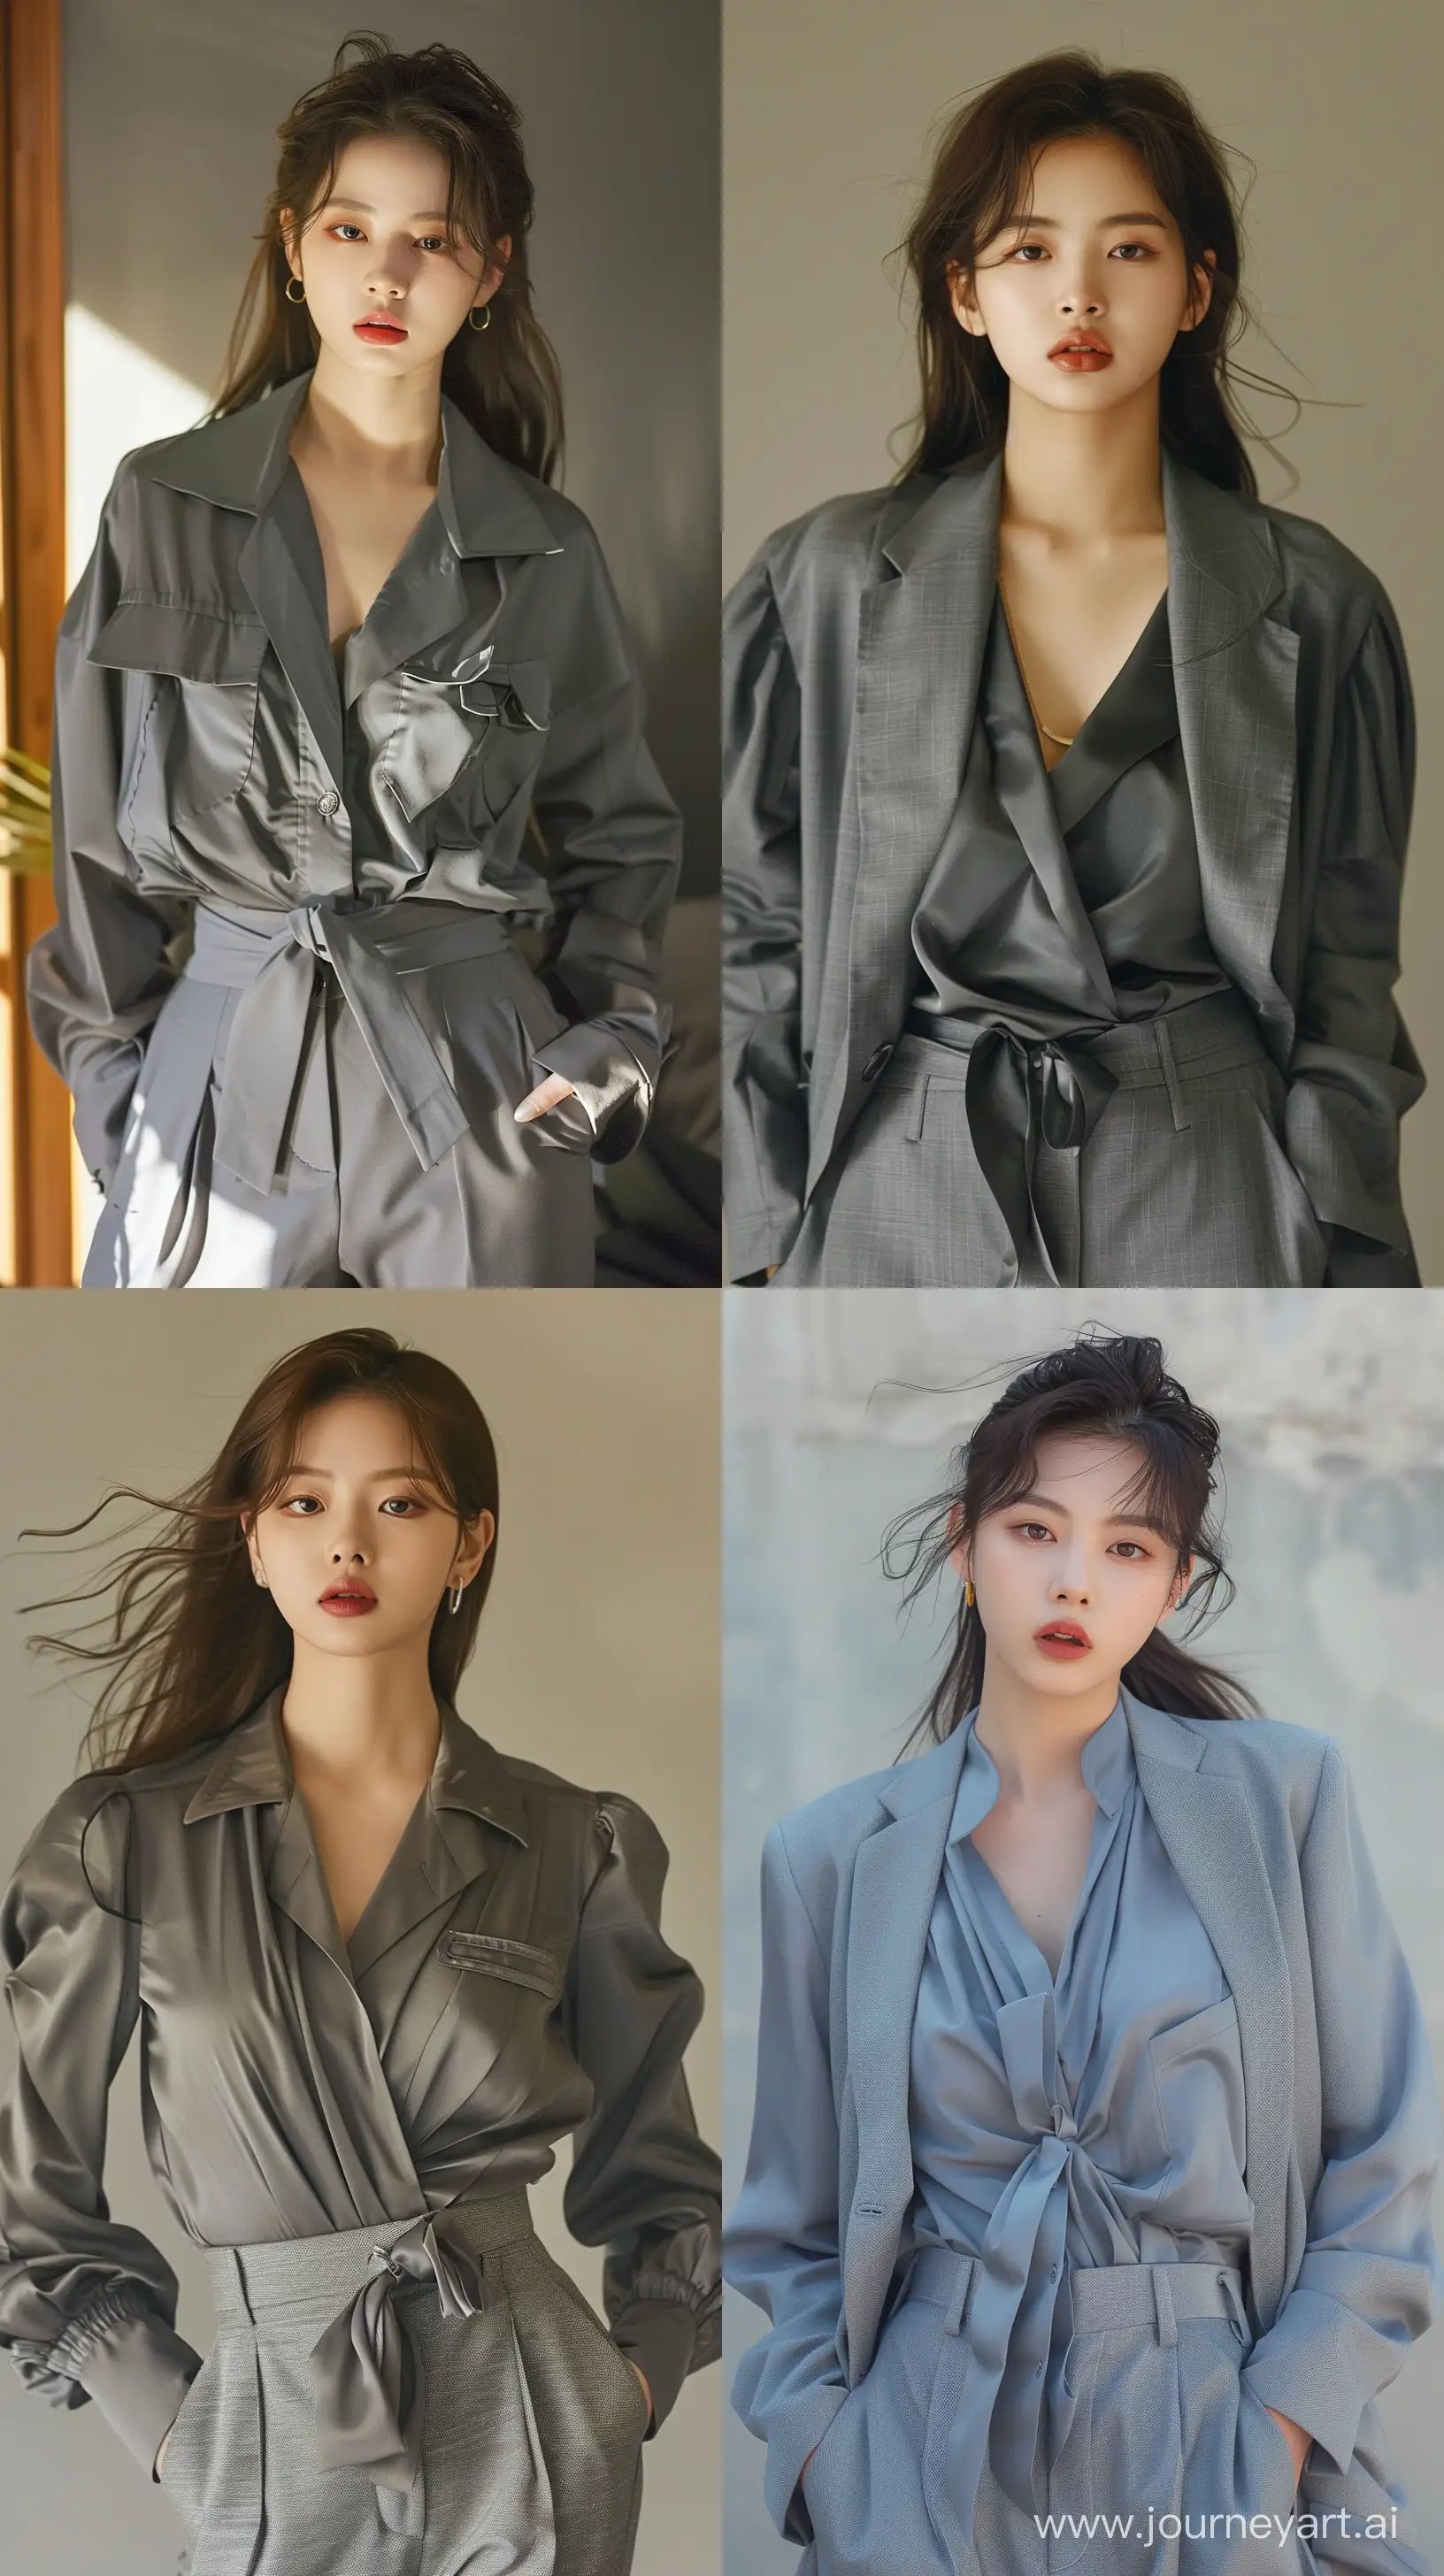 Stylish-Asian-Woman-in-Grey-Oversize-Outfit-Inspired-by-Blackpinks-Jennie